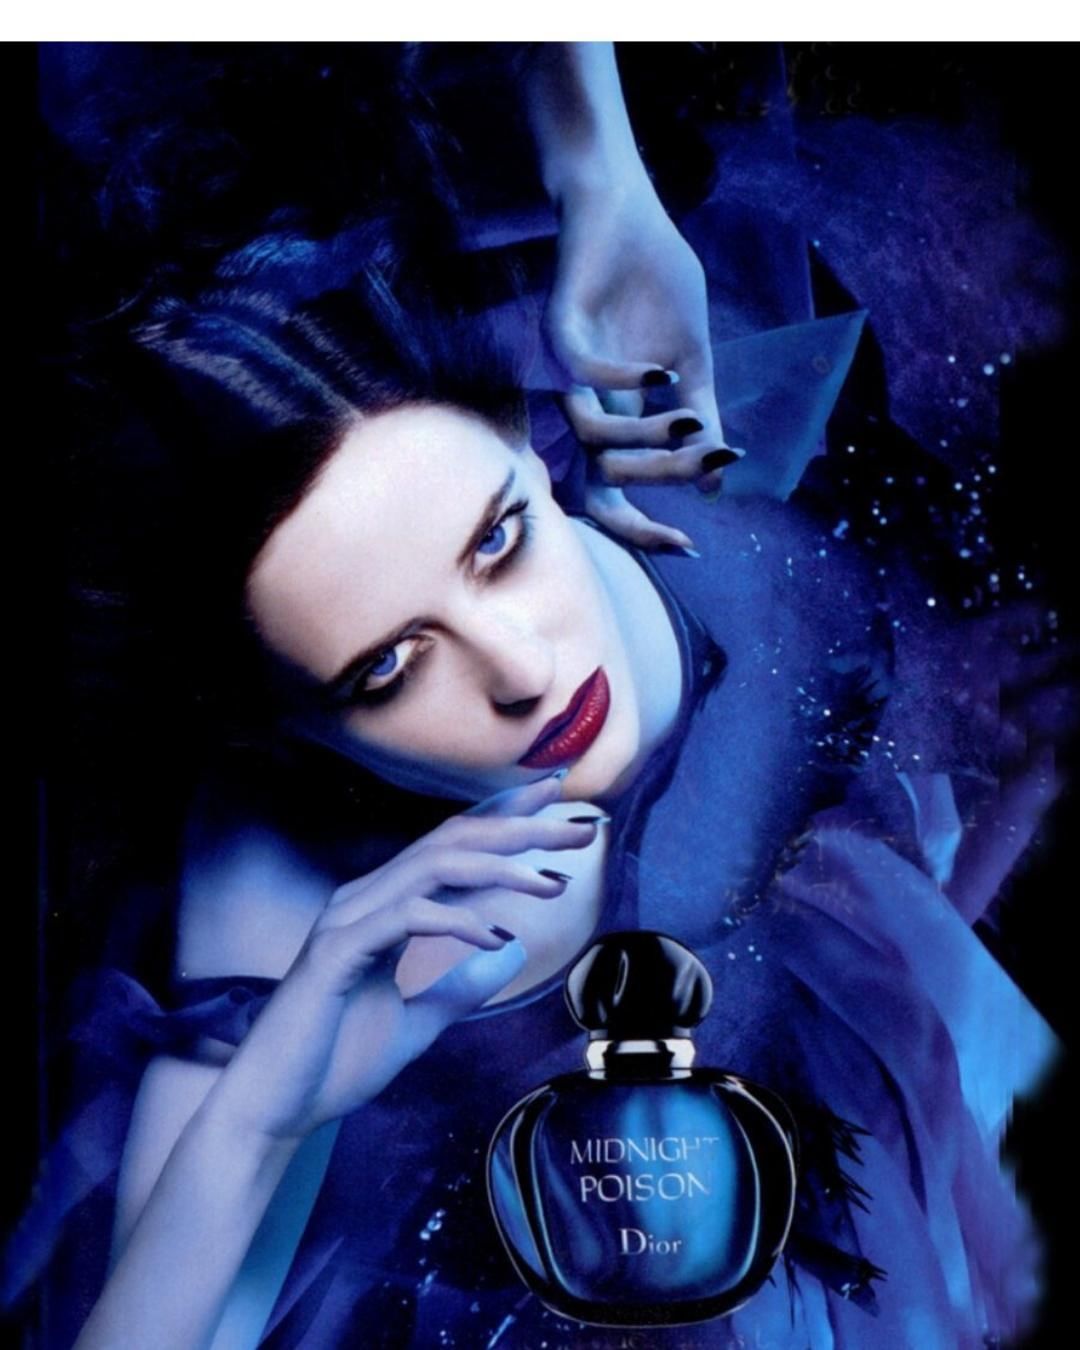 7/24 Perfumes - New Arrivals. Cd midnight Poison shop now from here 
https://bit.ly/2Oq5R1D 
#724Perfumes #Woman #Men #perfumes #offers #onlineshopping